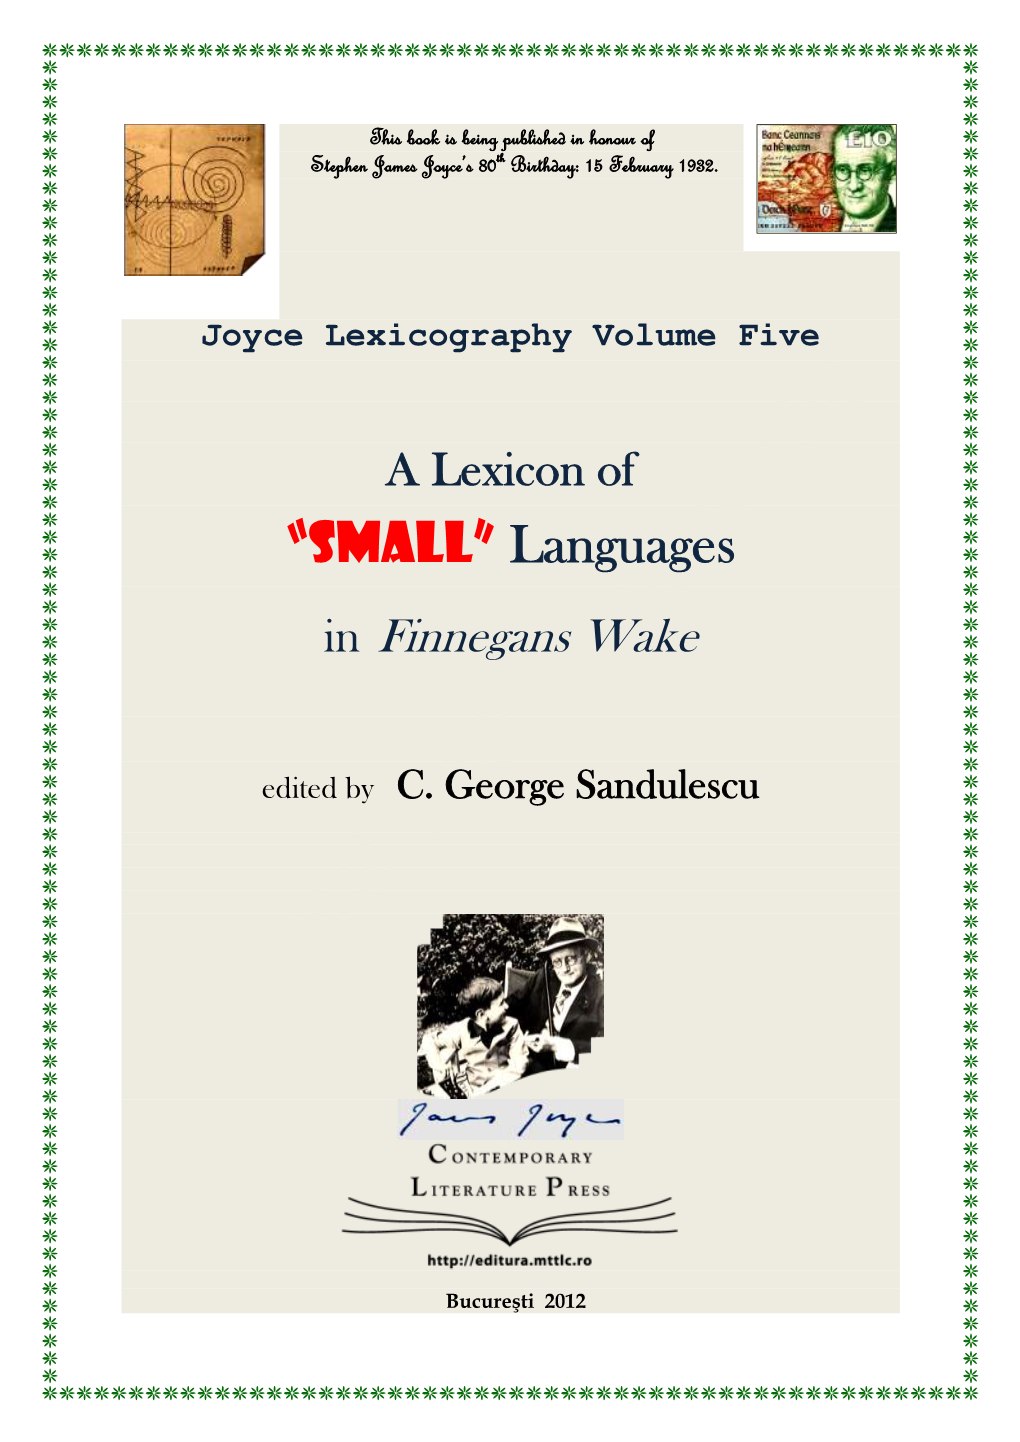 “Small” Languages in Finnegans Wake, Edited by C